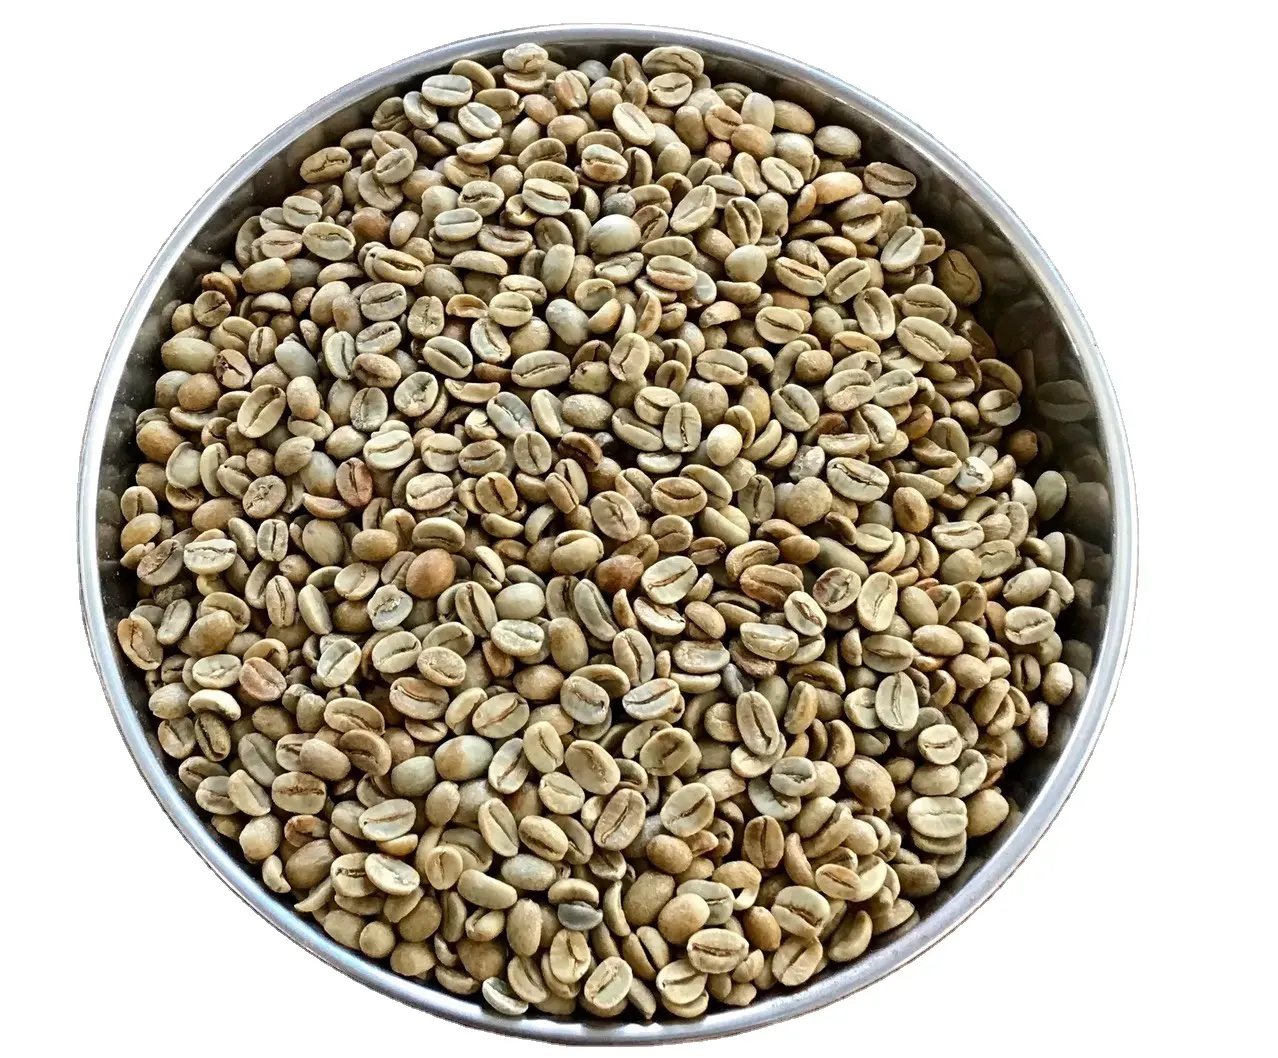 VIETNAMESE ROBUSTA/ARABICA from leading factory good brand coffee +84796855283 (Mr.Brian)